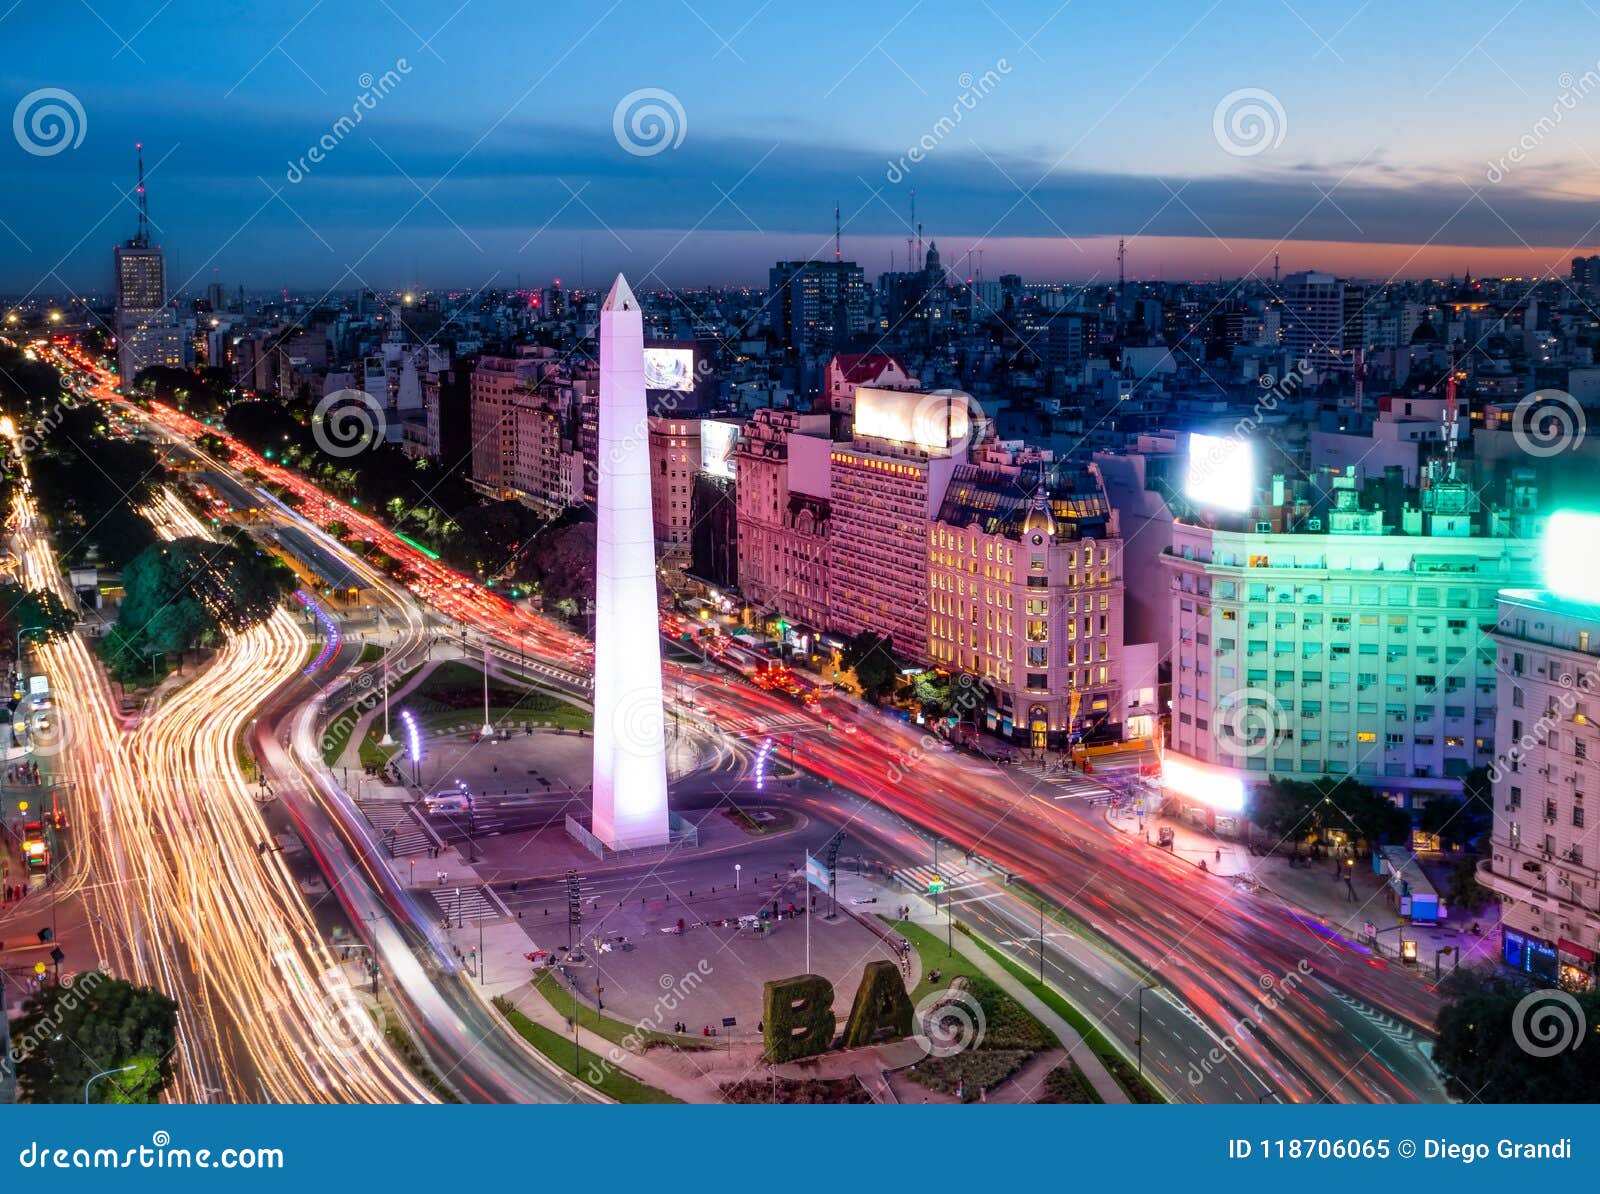 aerial view of buenos aires city with obelisk and 9 de julio avenue at night - buenos aires, argentina